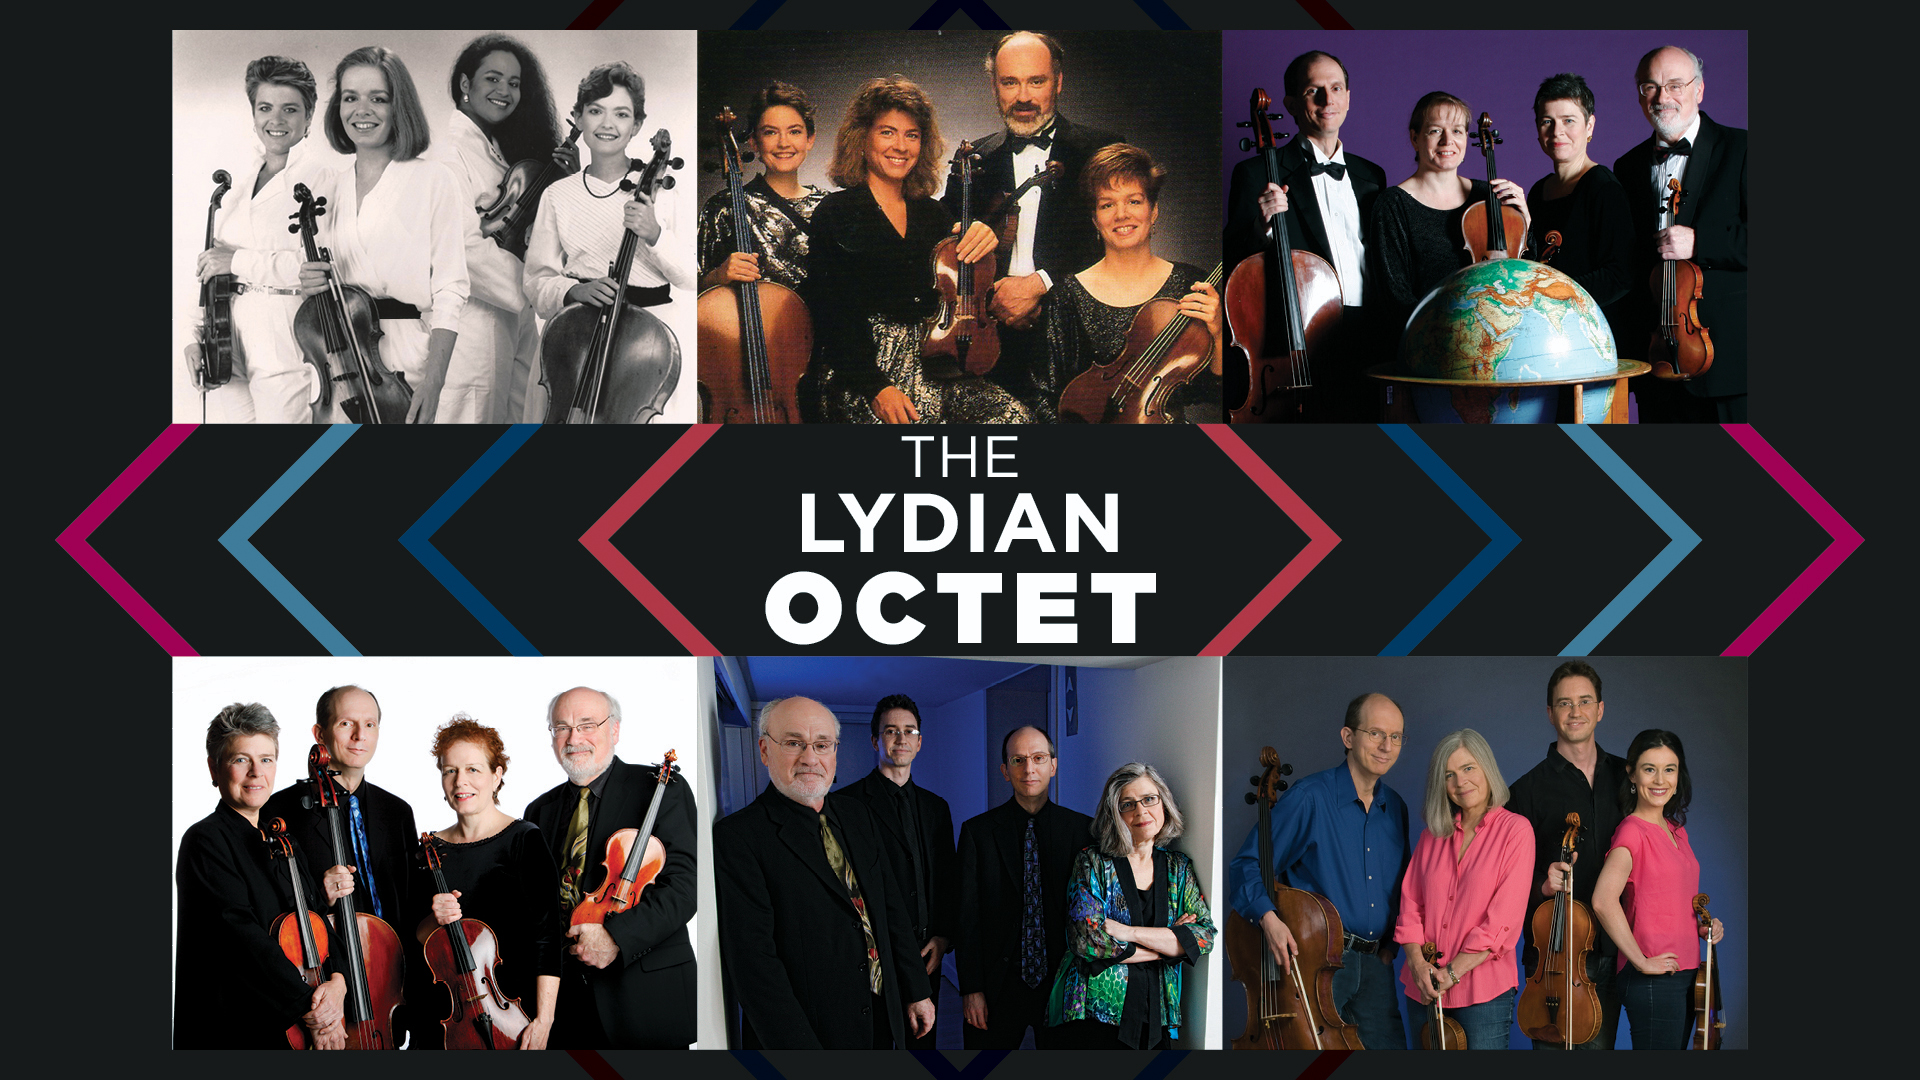 Poster for the Lydian Octet, including pictures of the quartet from the past and present